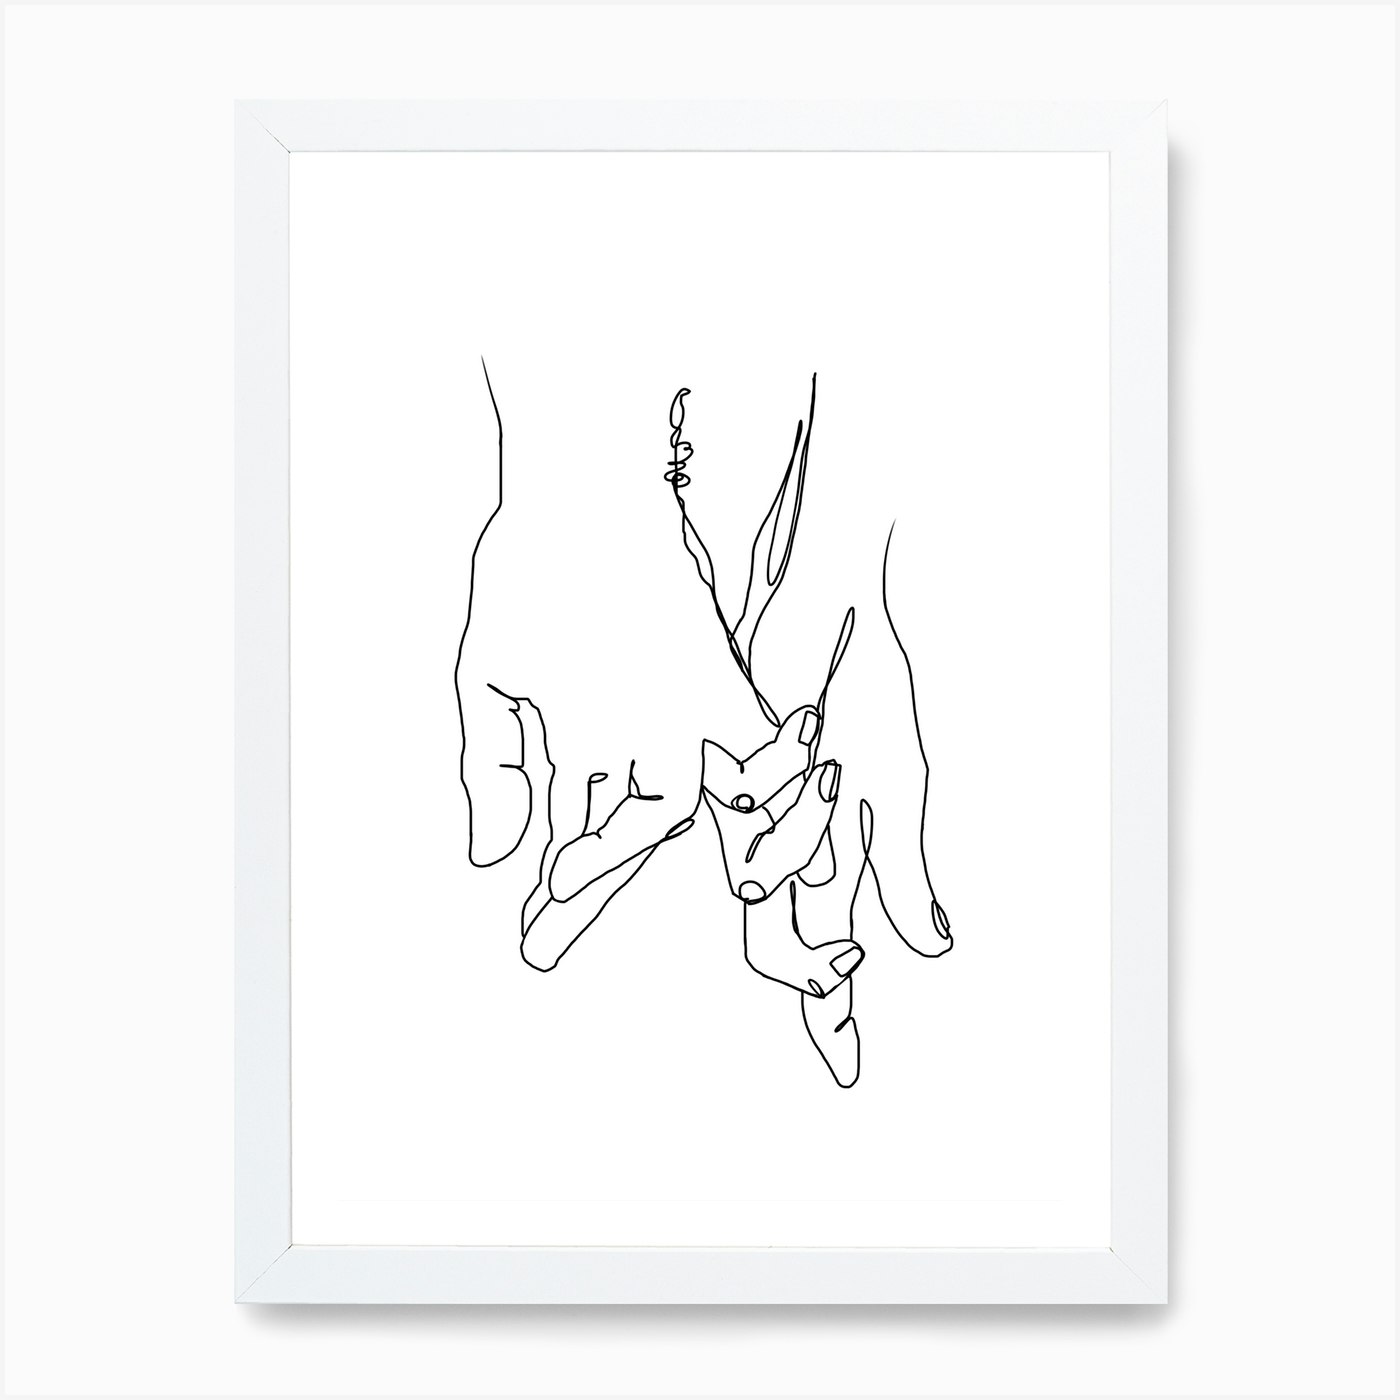 Wherever You Are Going Square Art Print By Hanna Lee Tidd Fy